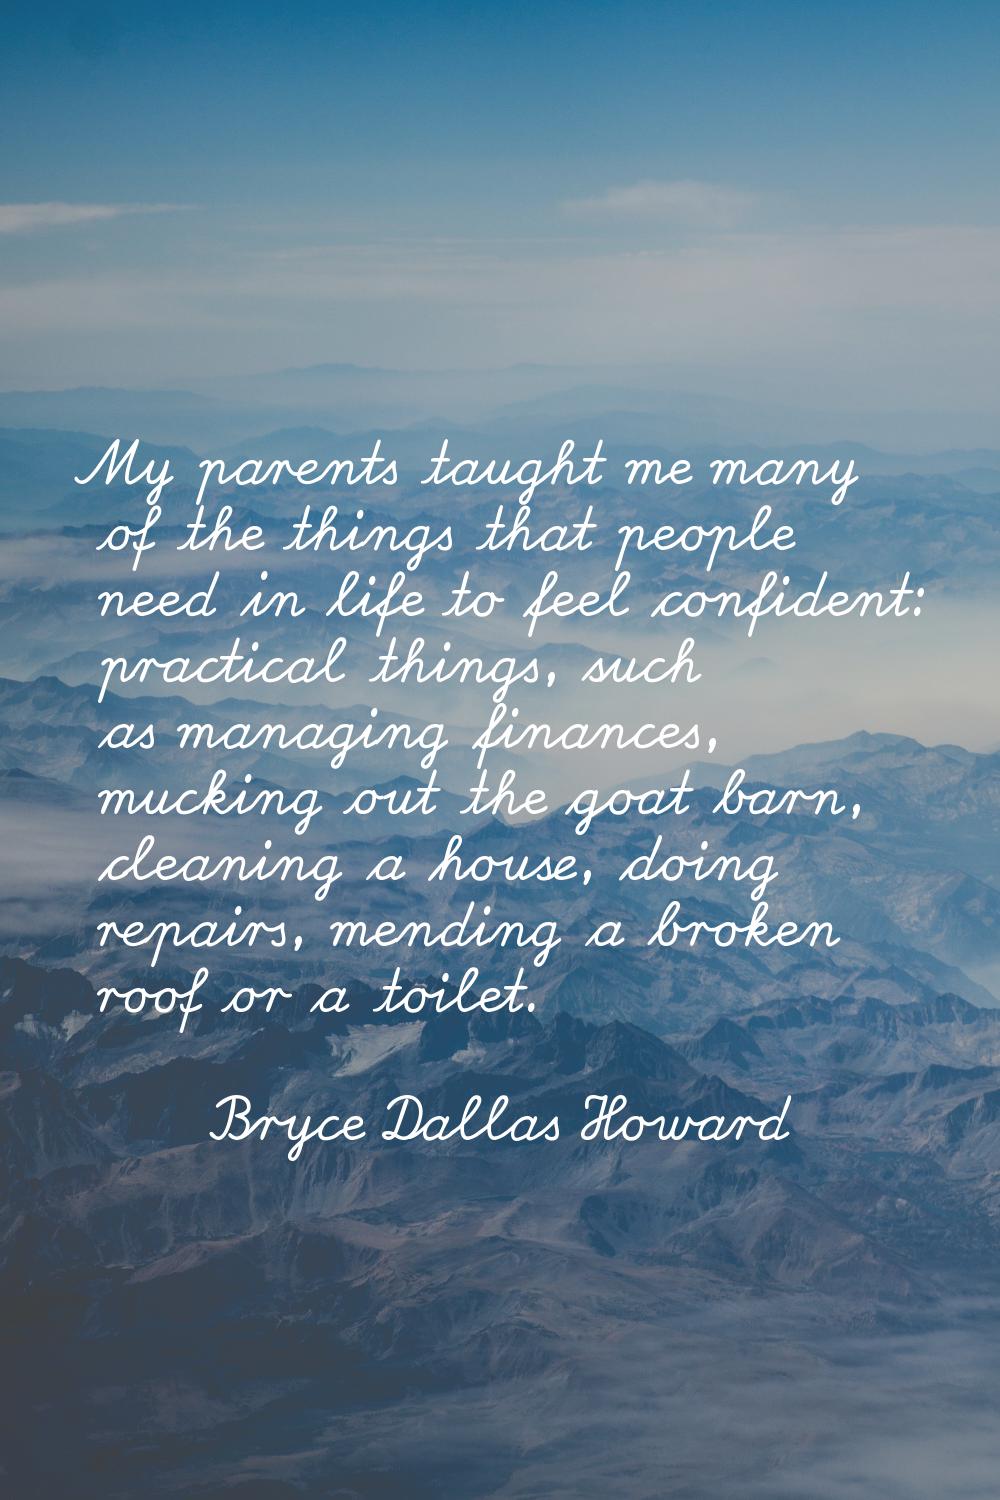 My parents taught me many of the things that people need in life to feel confident: practical thing